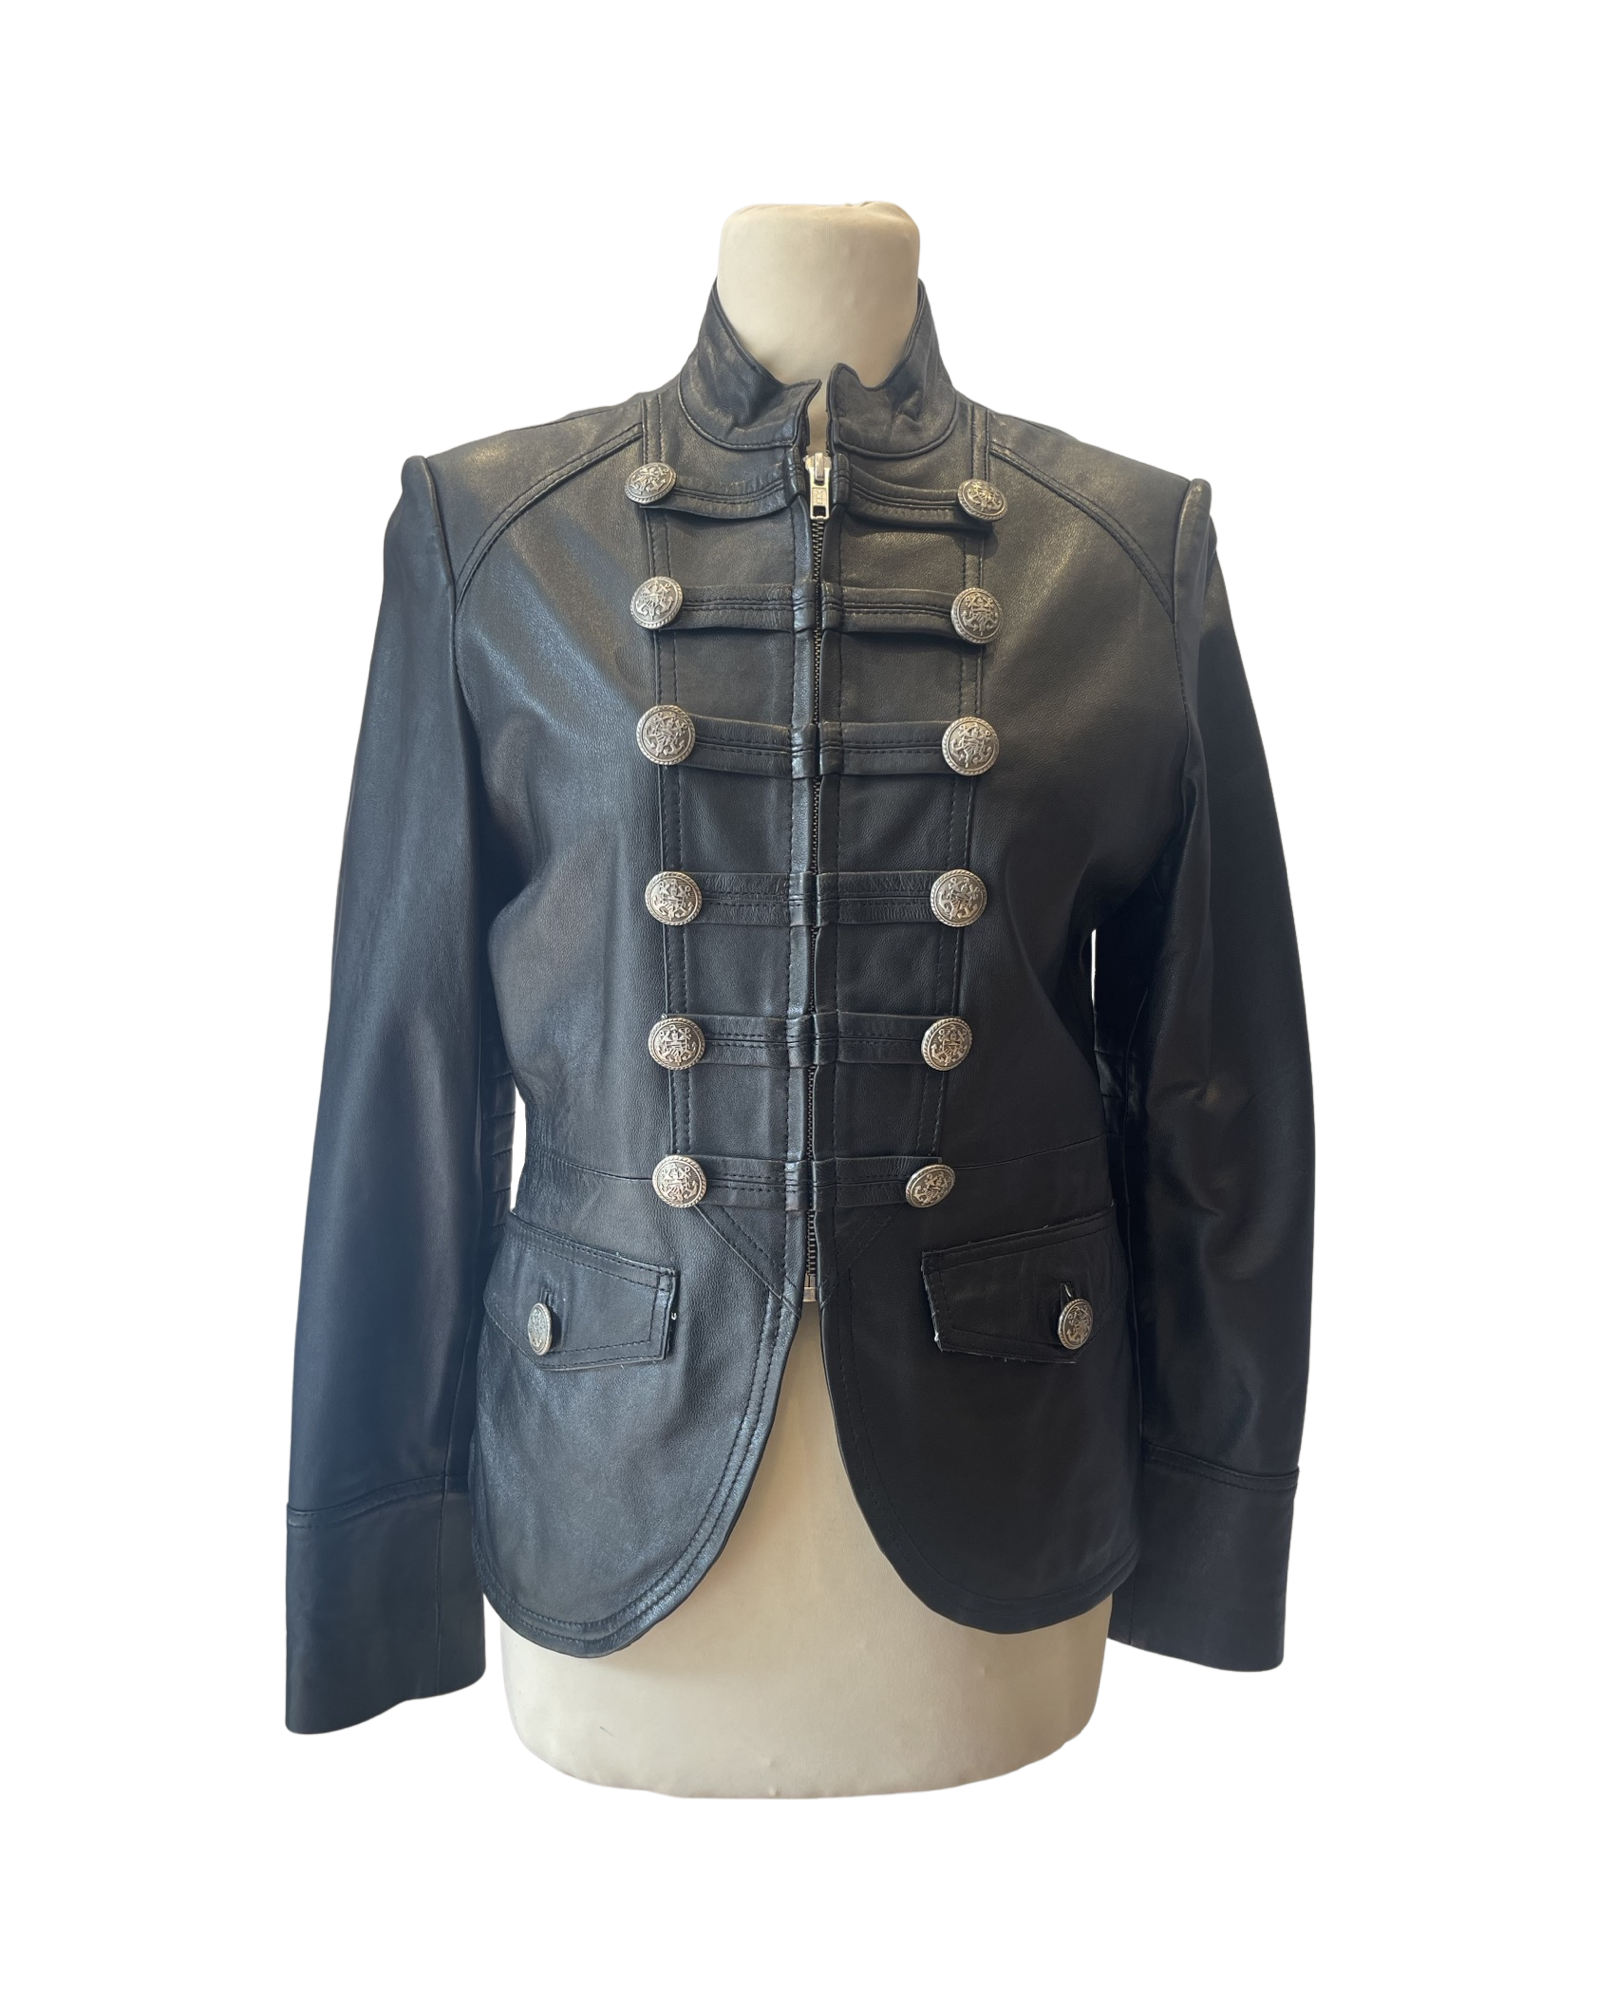 Military style 12 silver buttons  black leather jacket